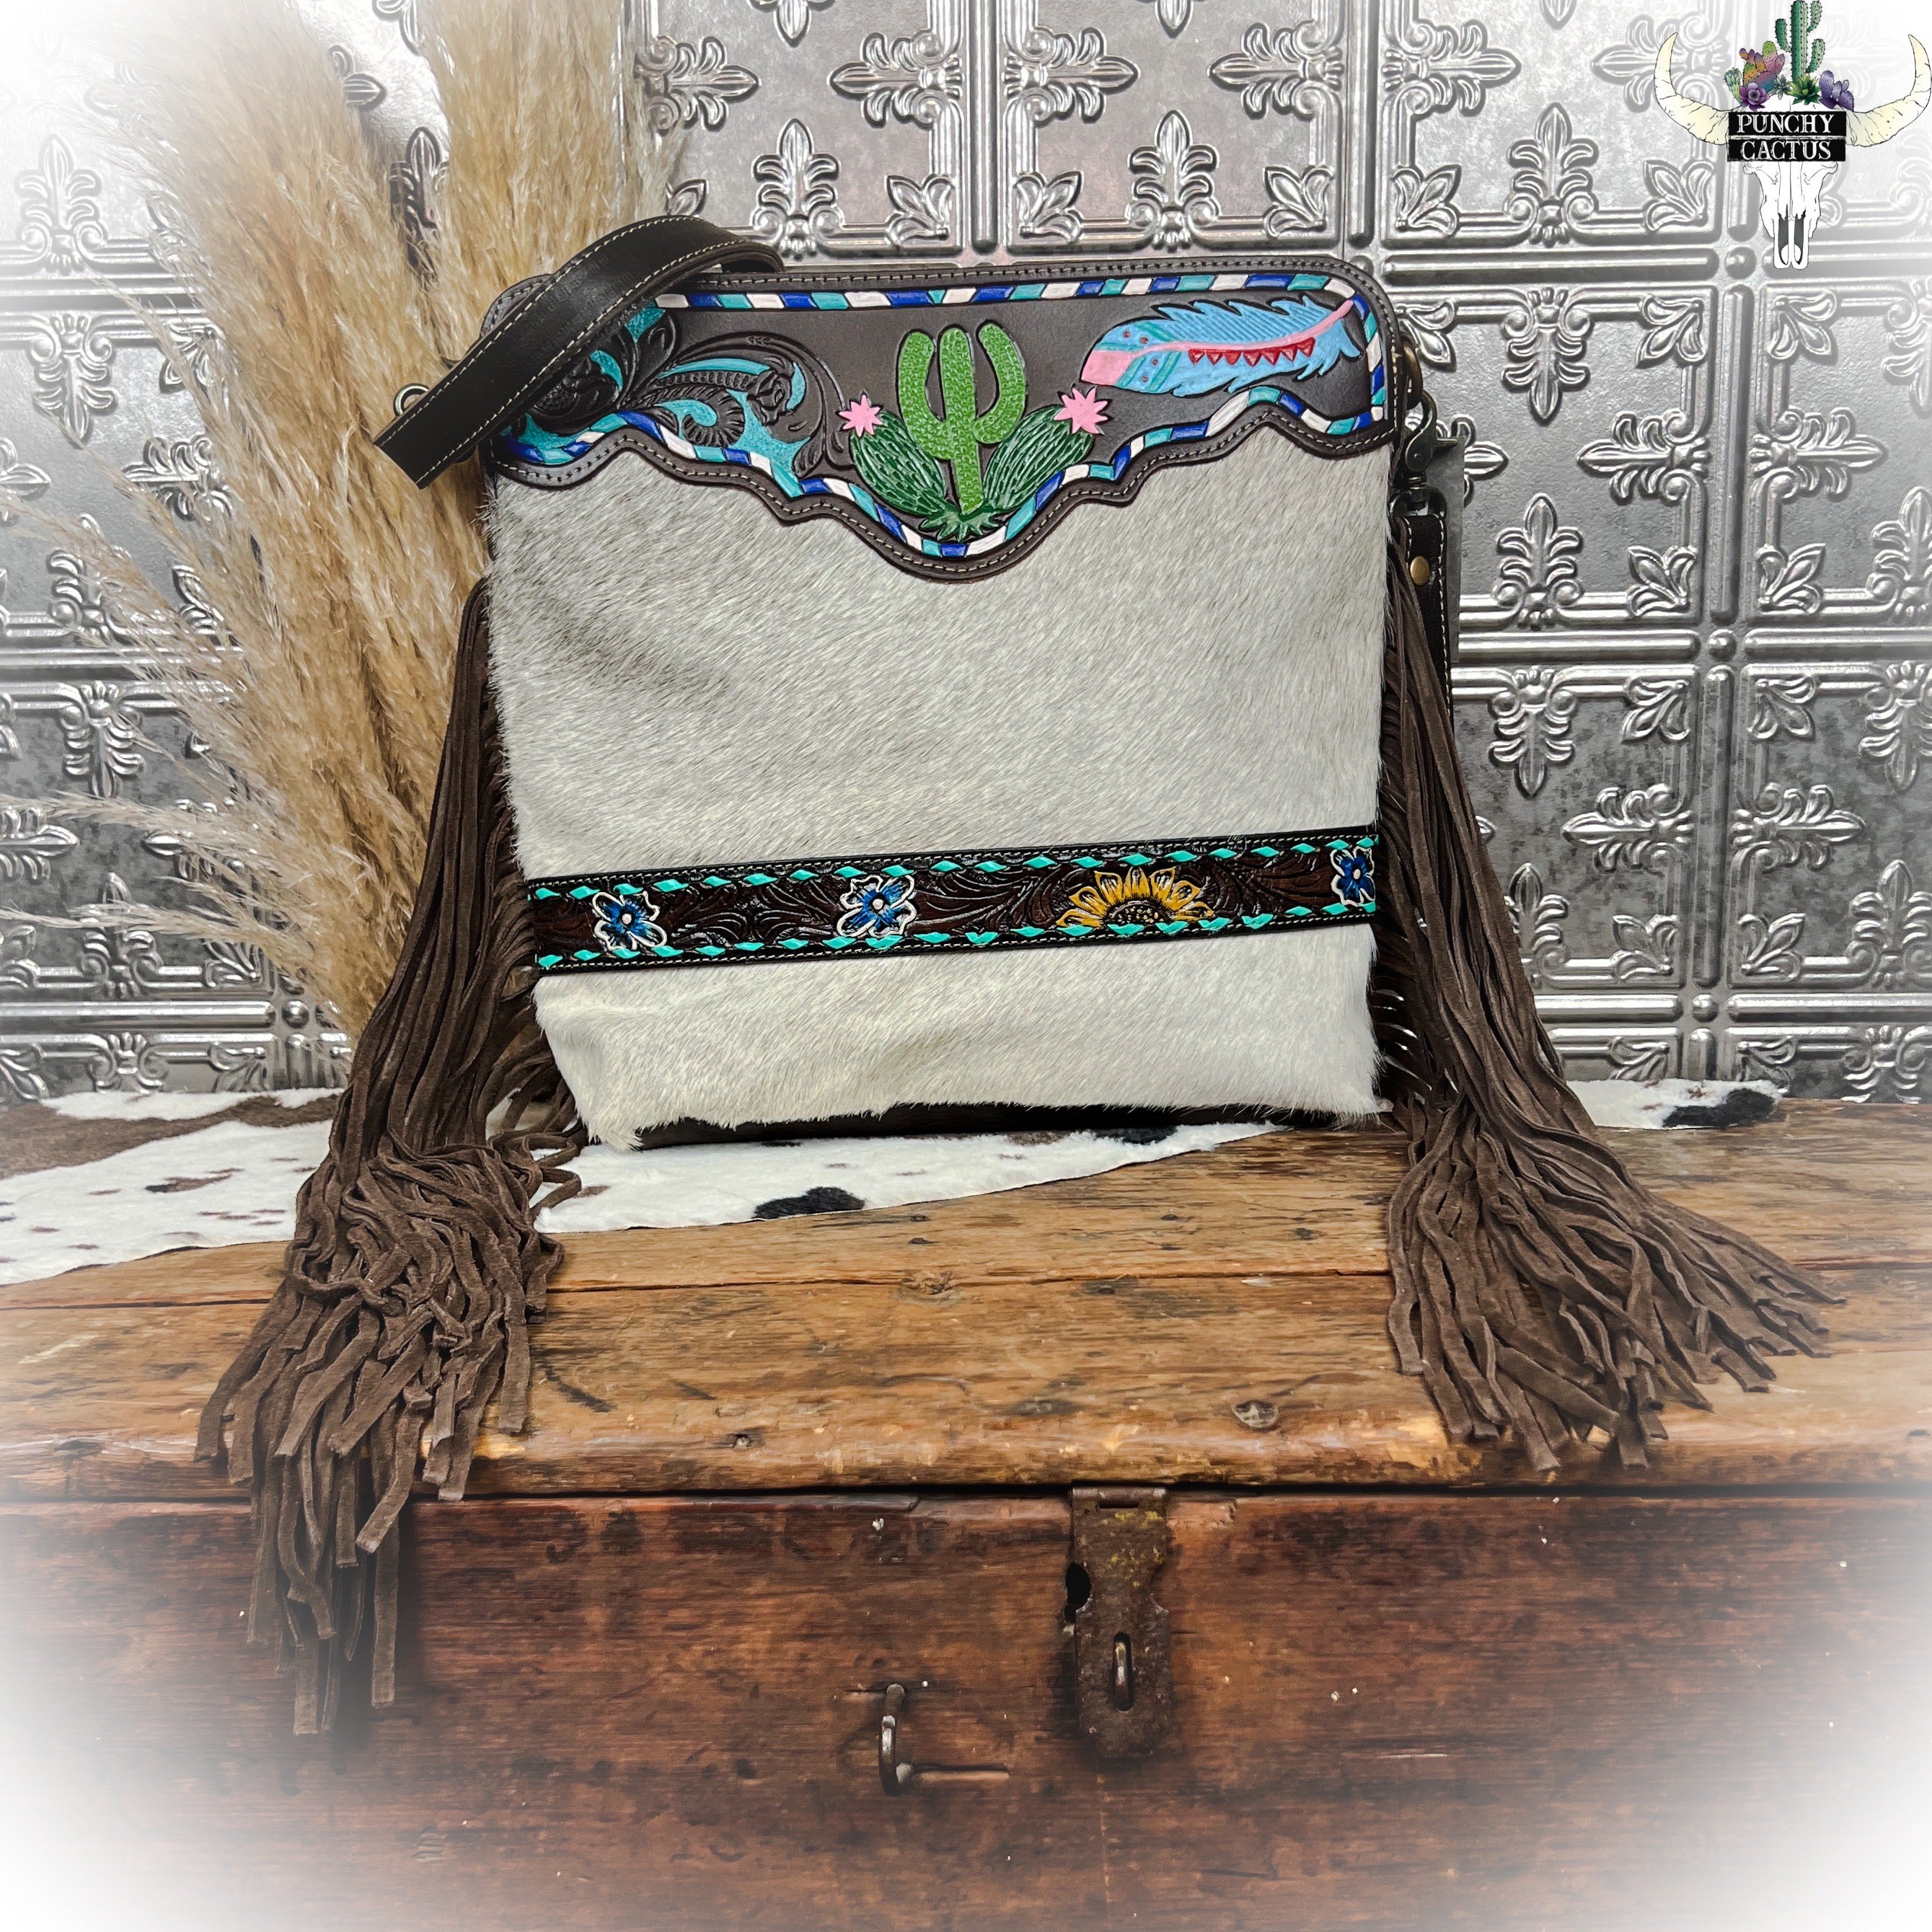 Accessories, Purses and Bags – Rustic Cactus